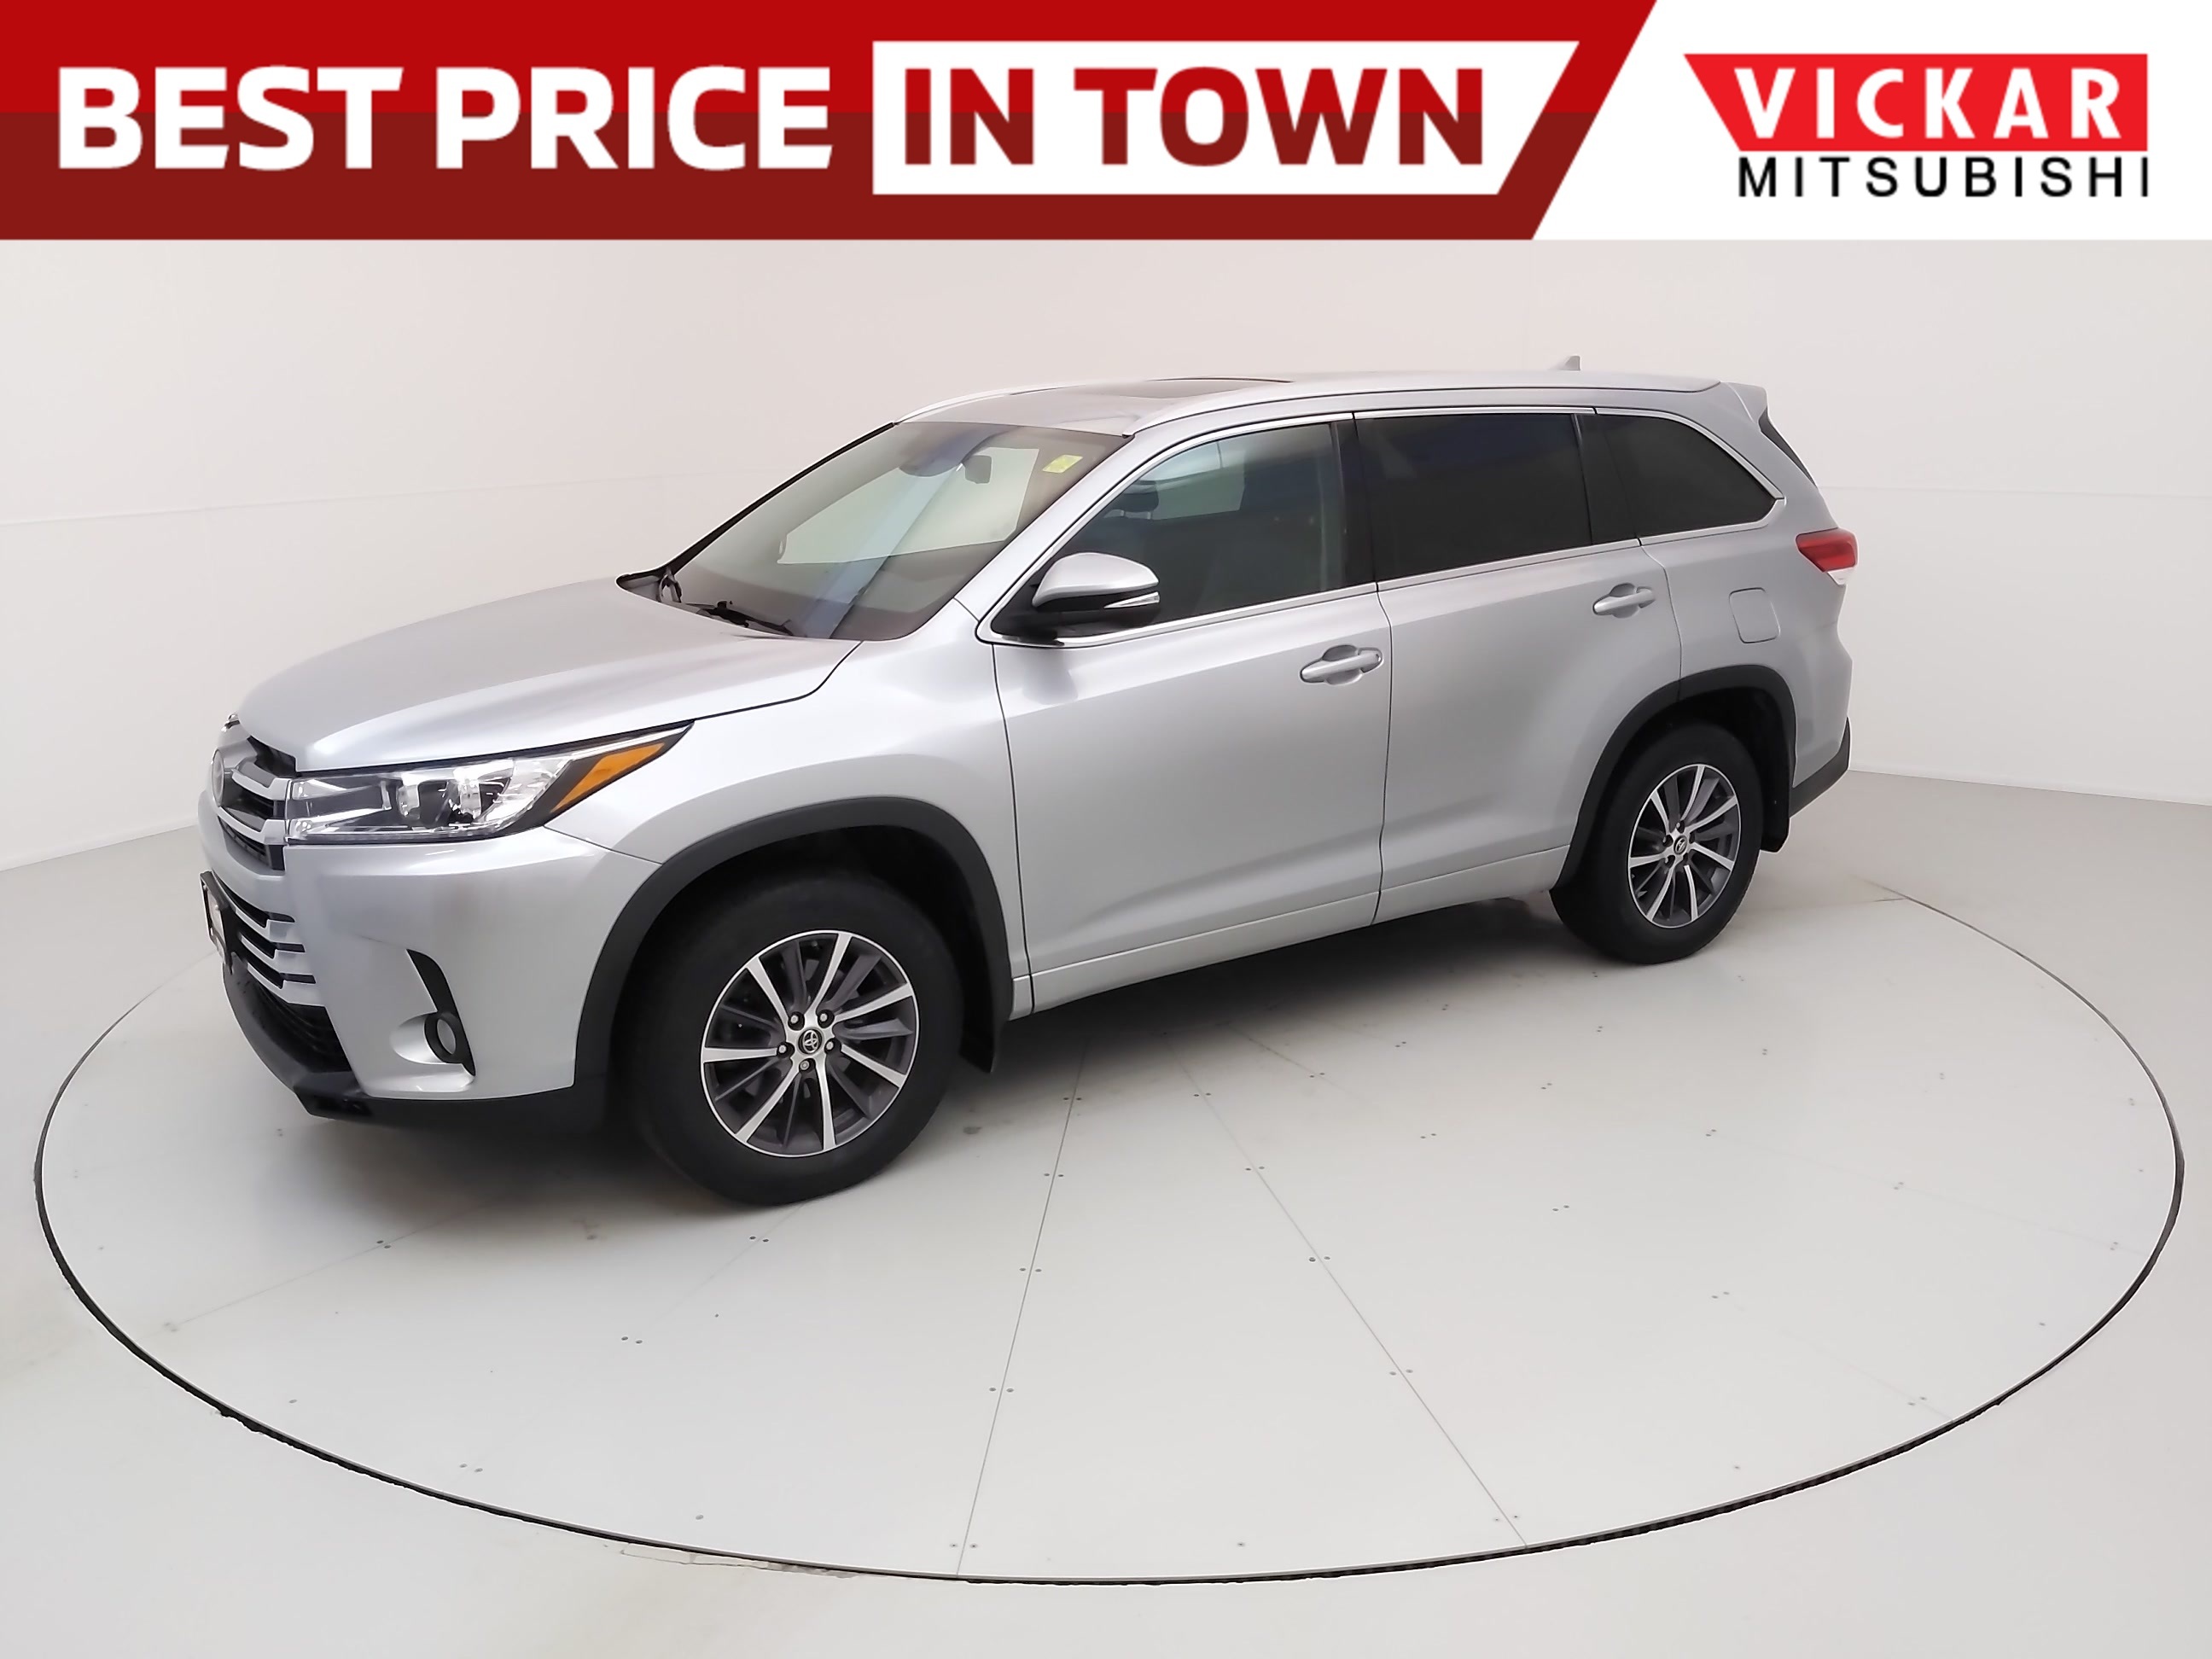 2017 Toyota Highlander AWD 4dr XLE 7 SEATER FULL LOADED 